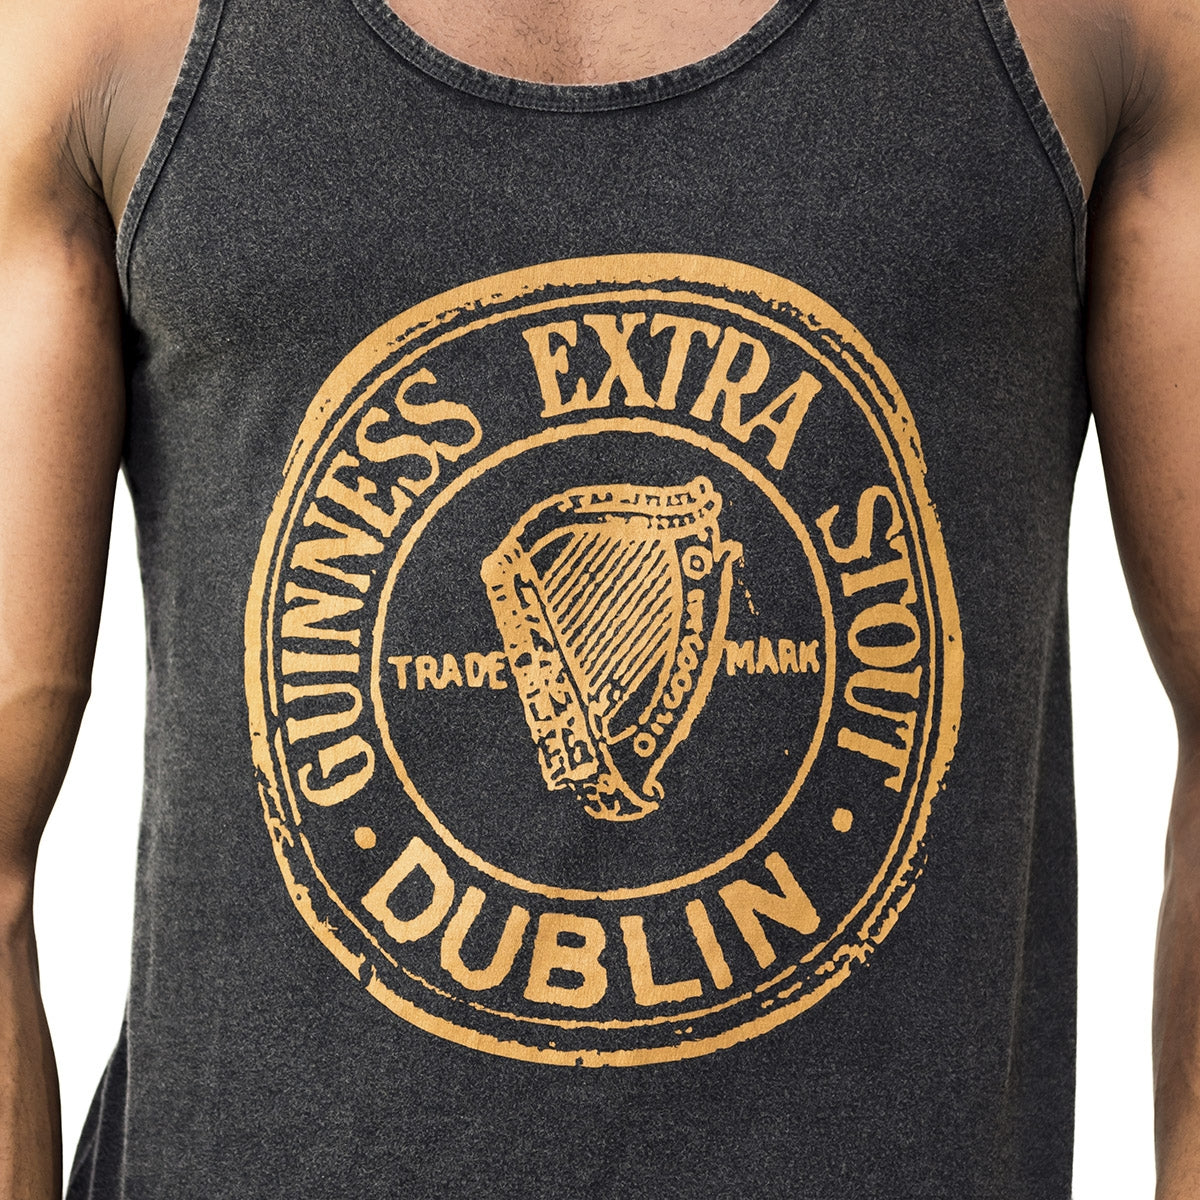 Guinness Washed Extra Stout tank top, perfect for the summer months in Dublin.